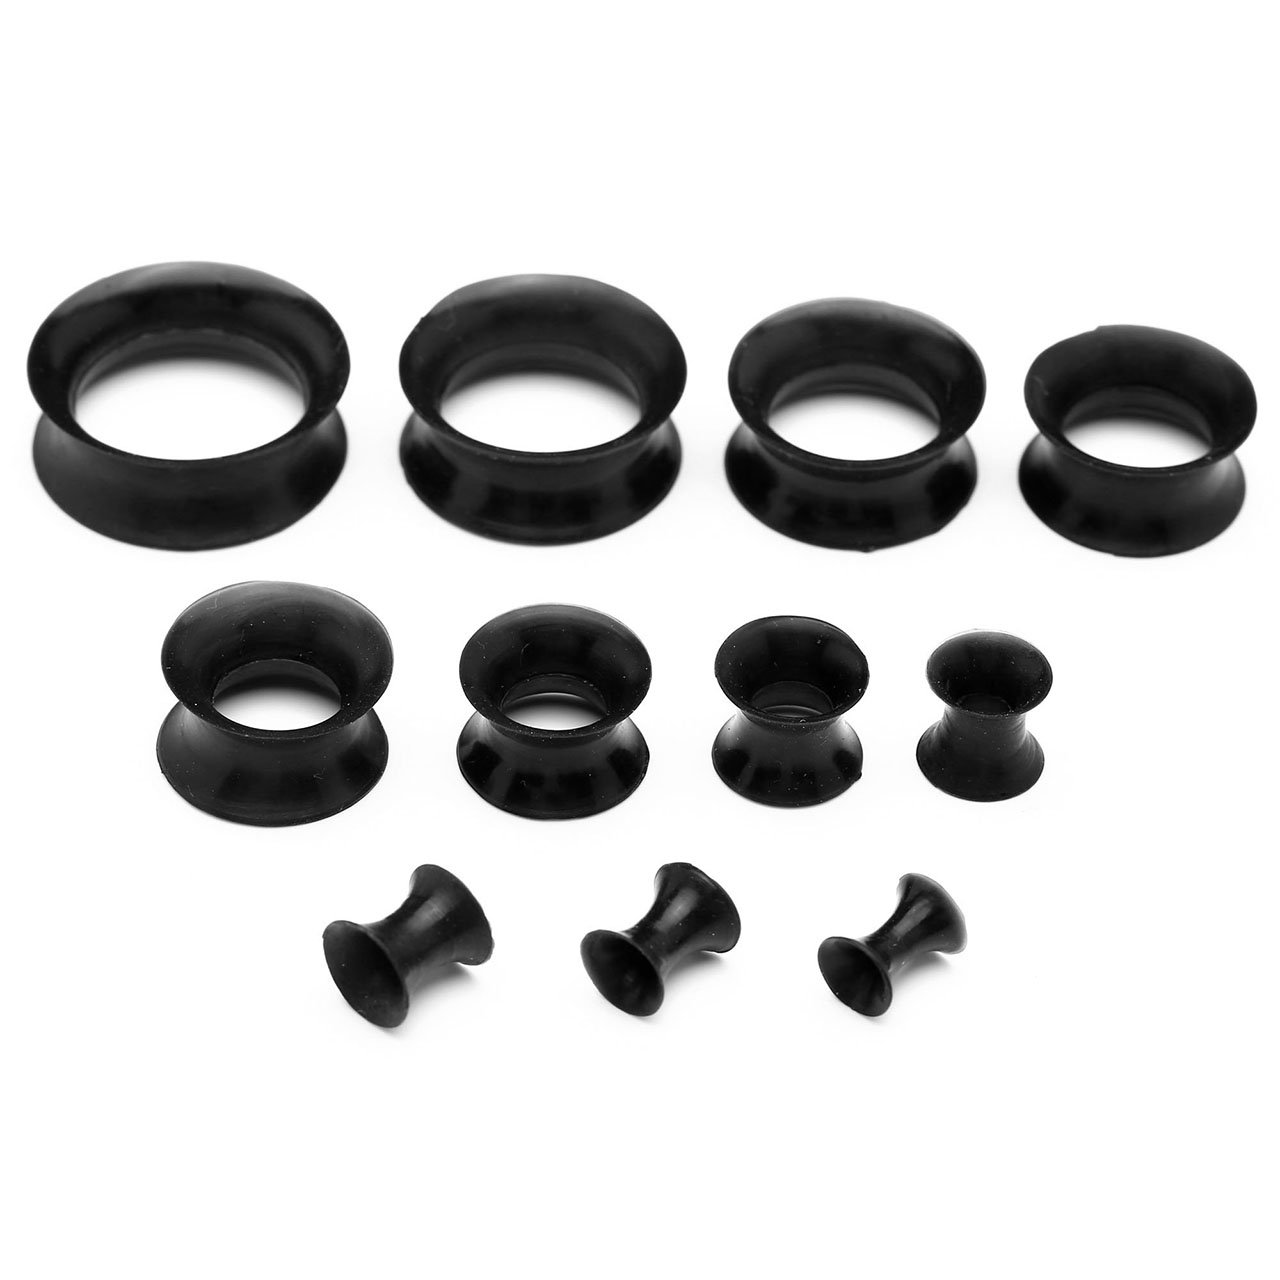 PiercingJ 22pcs 8G-3/4 Ultra Thin Silicone Double Flared Flexible Tunnel Ear Stretching Plug Gauge Kit - 11 Pairs